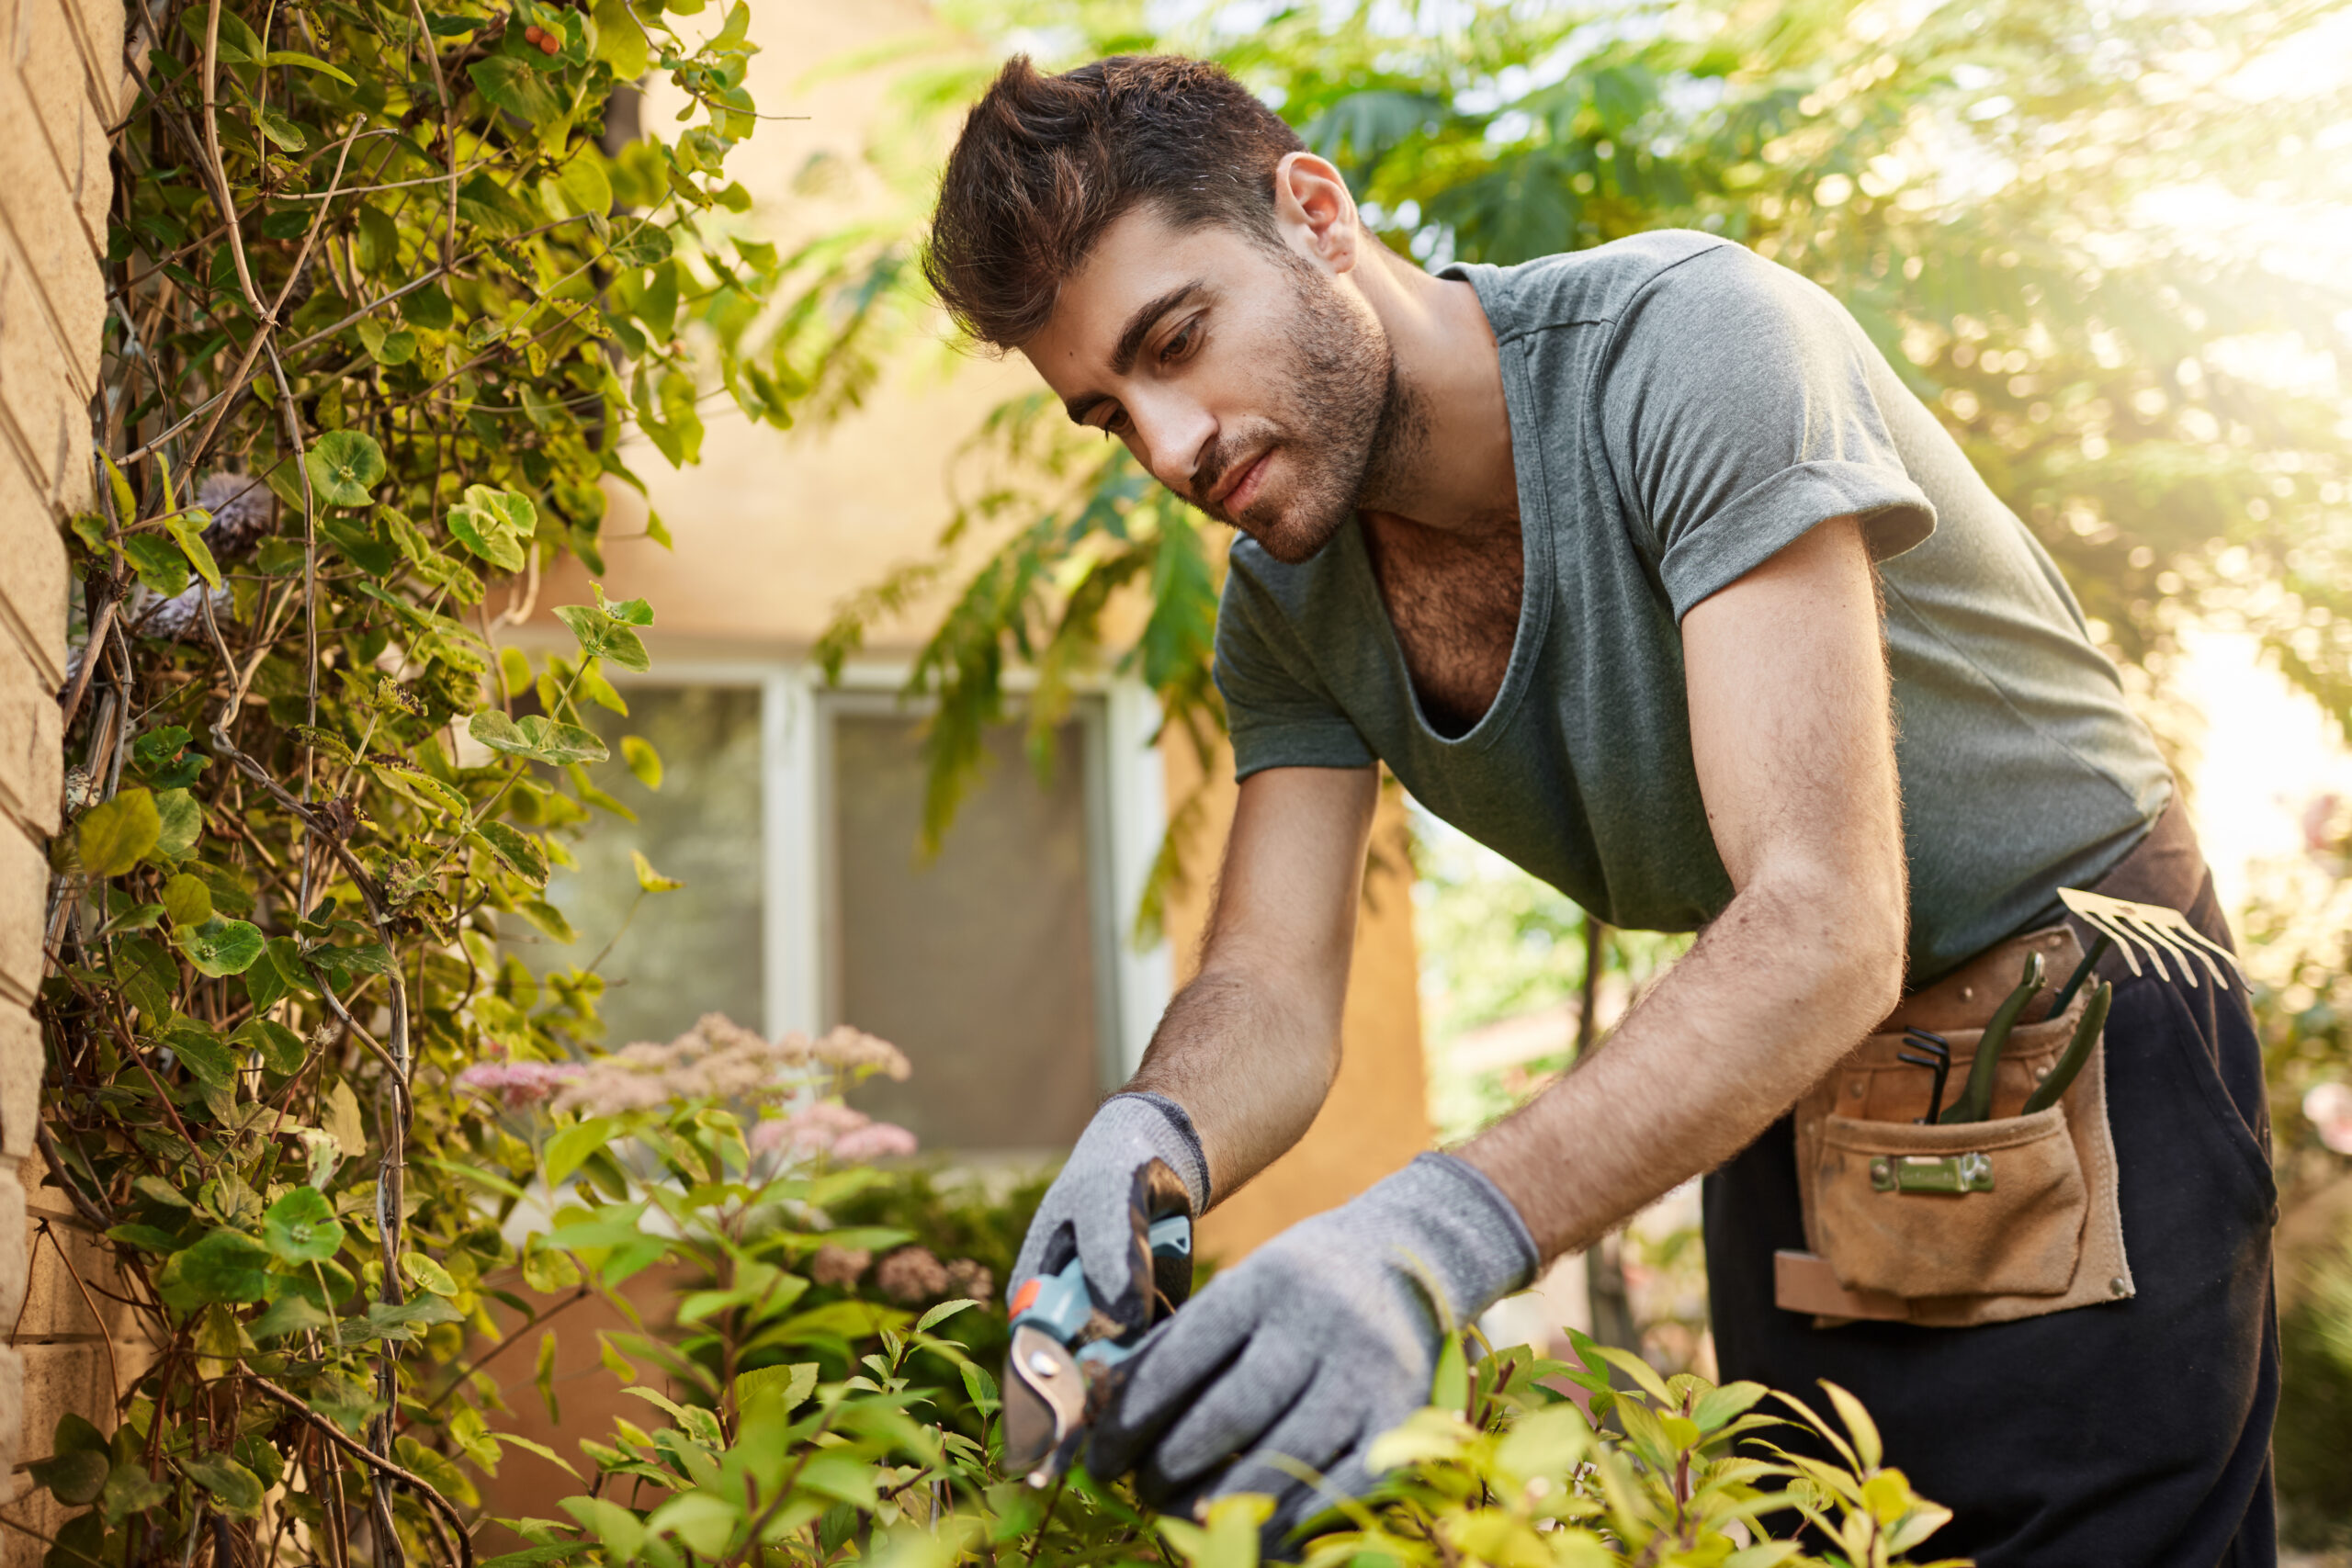 Outdoors portrait of young attractive bearded hispanic man in blue t-shirt and gloves working in garden with tools, cutting leaves, watering plants. Countryside life.